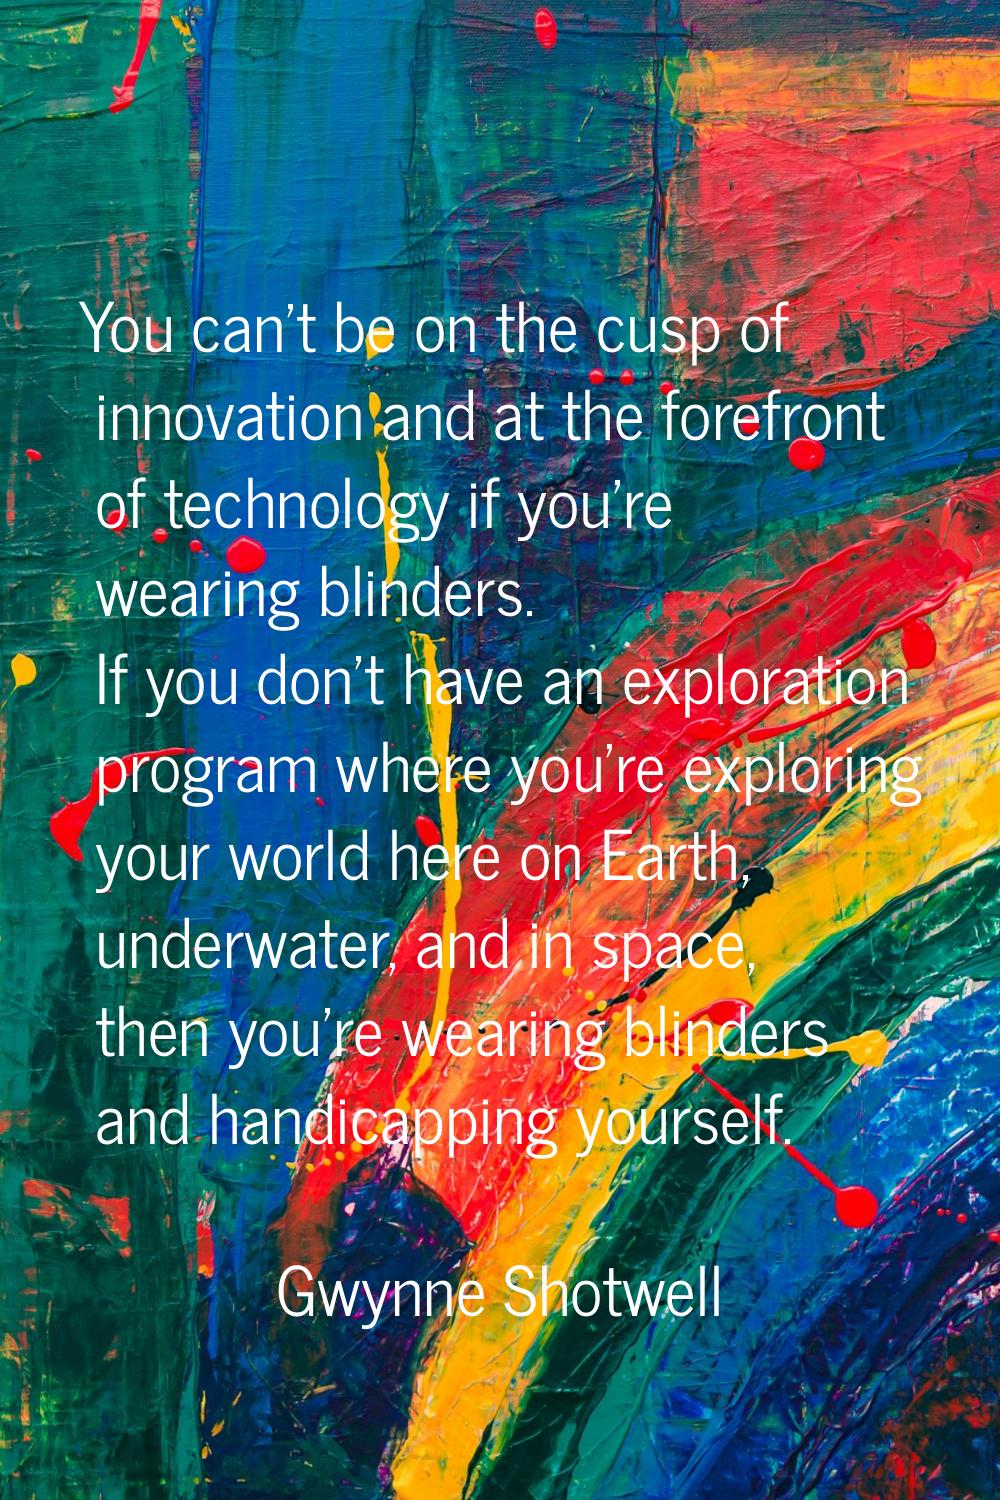 You can't be on the cusp of innovation and at the forefront of technology if you're wearing blinder